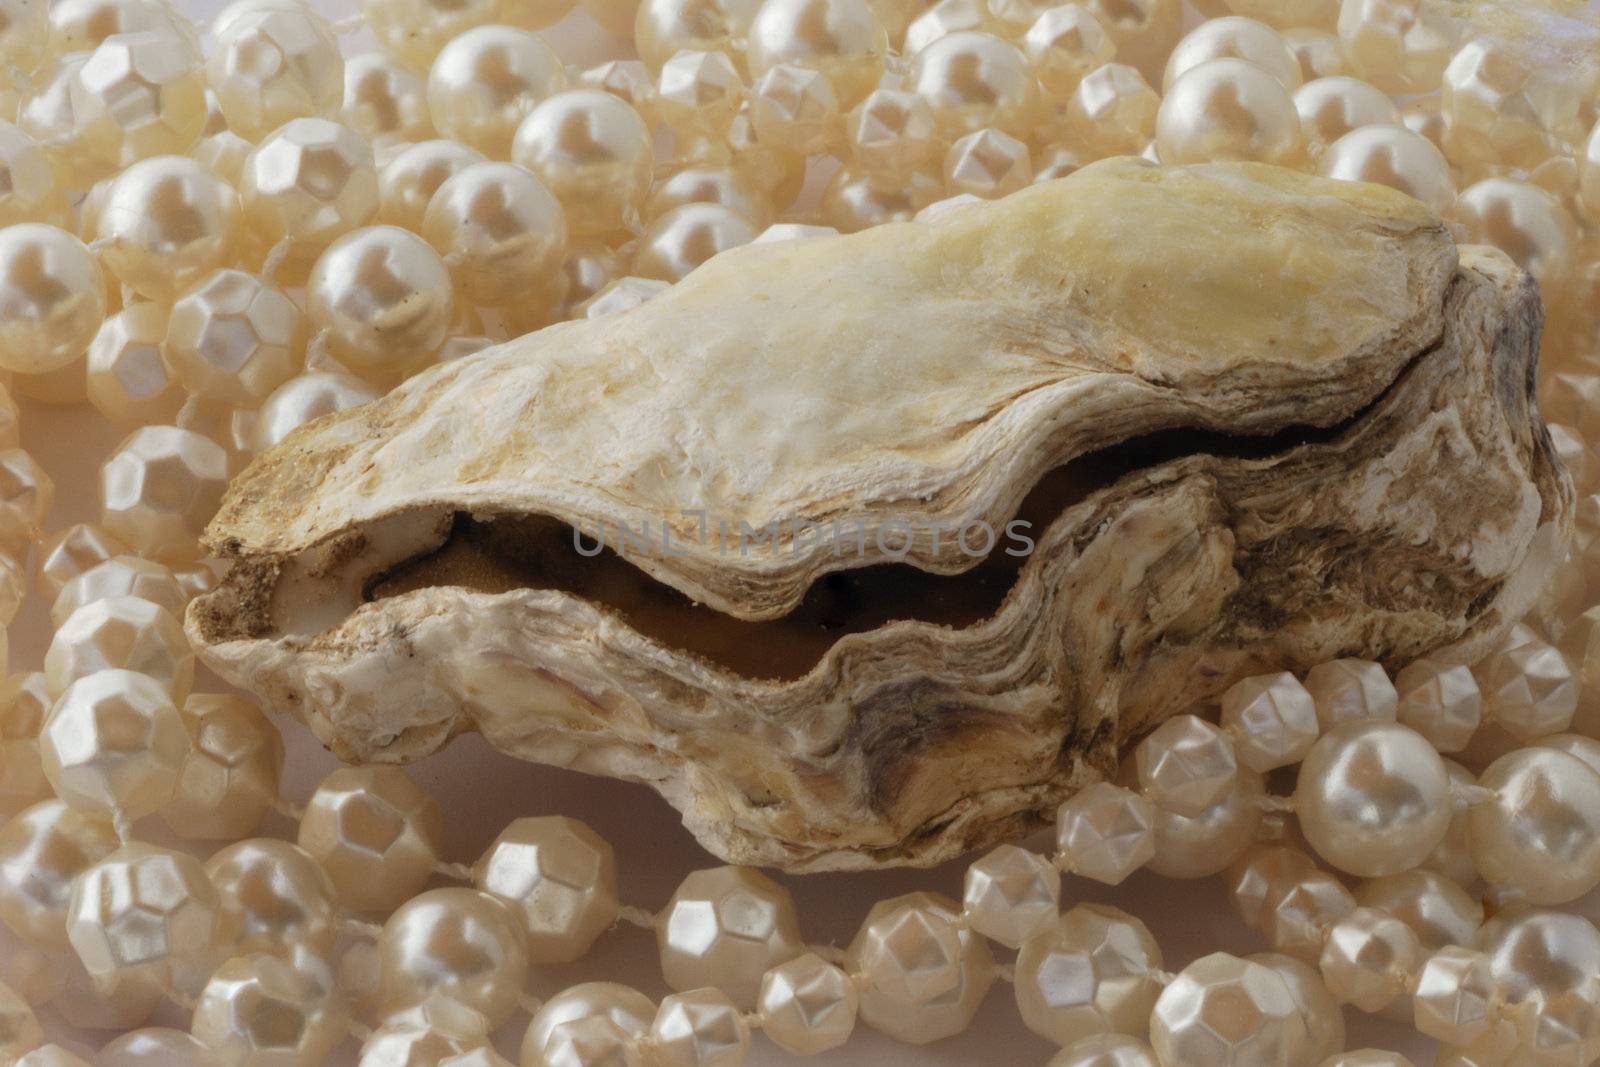 Oyster over pearls by pauws99